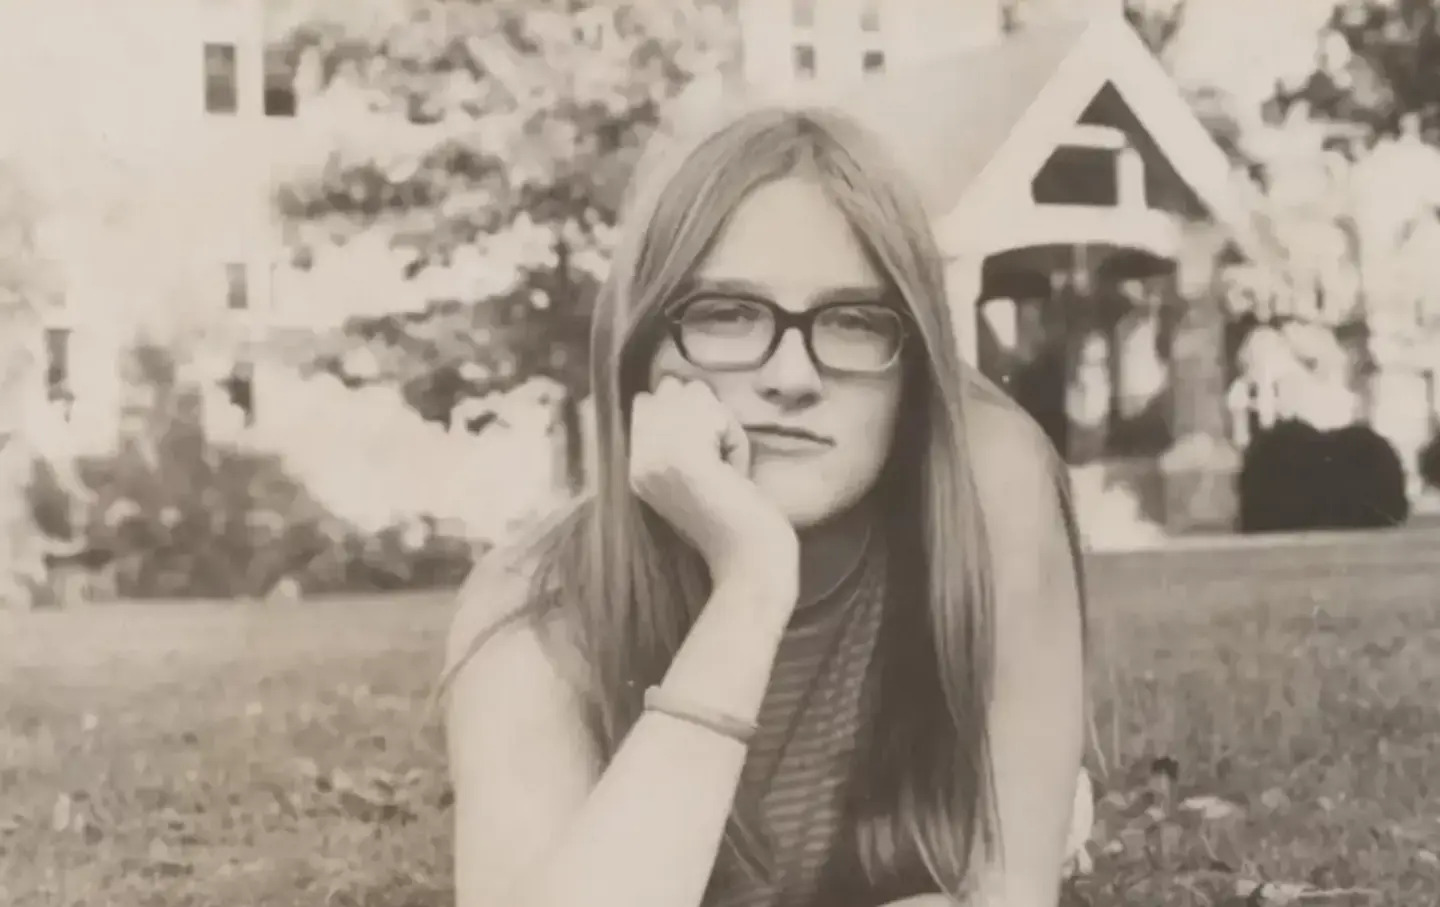 Drew Faust on Growing Up in the ’60s